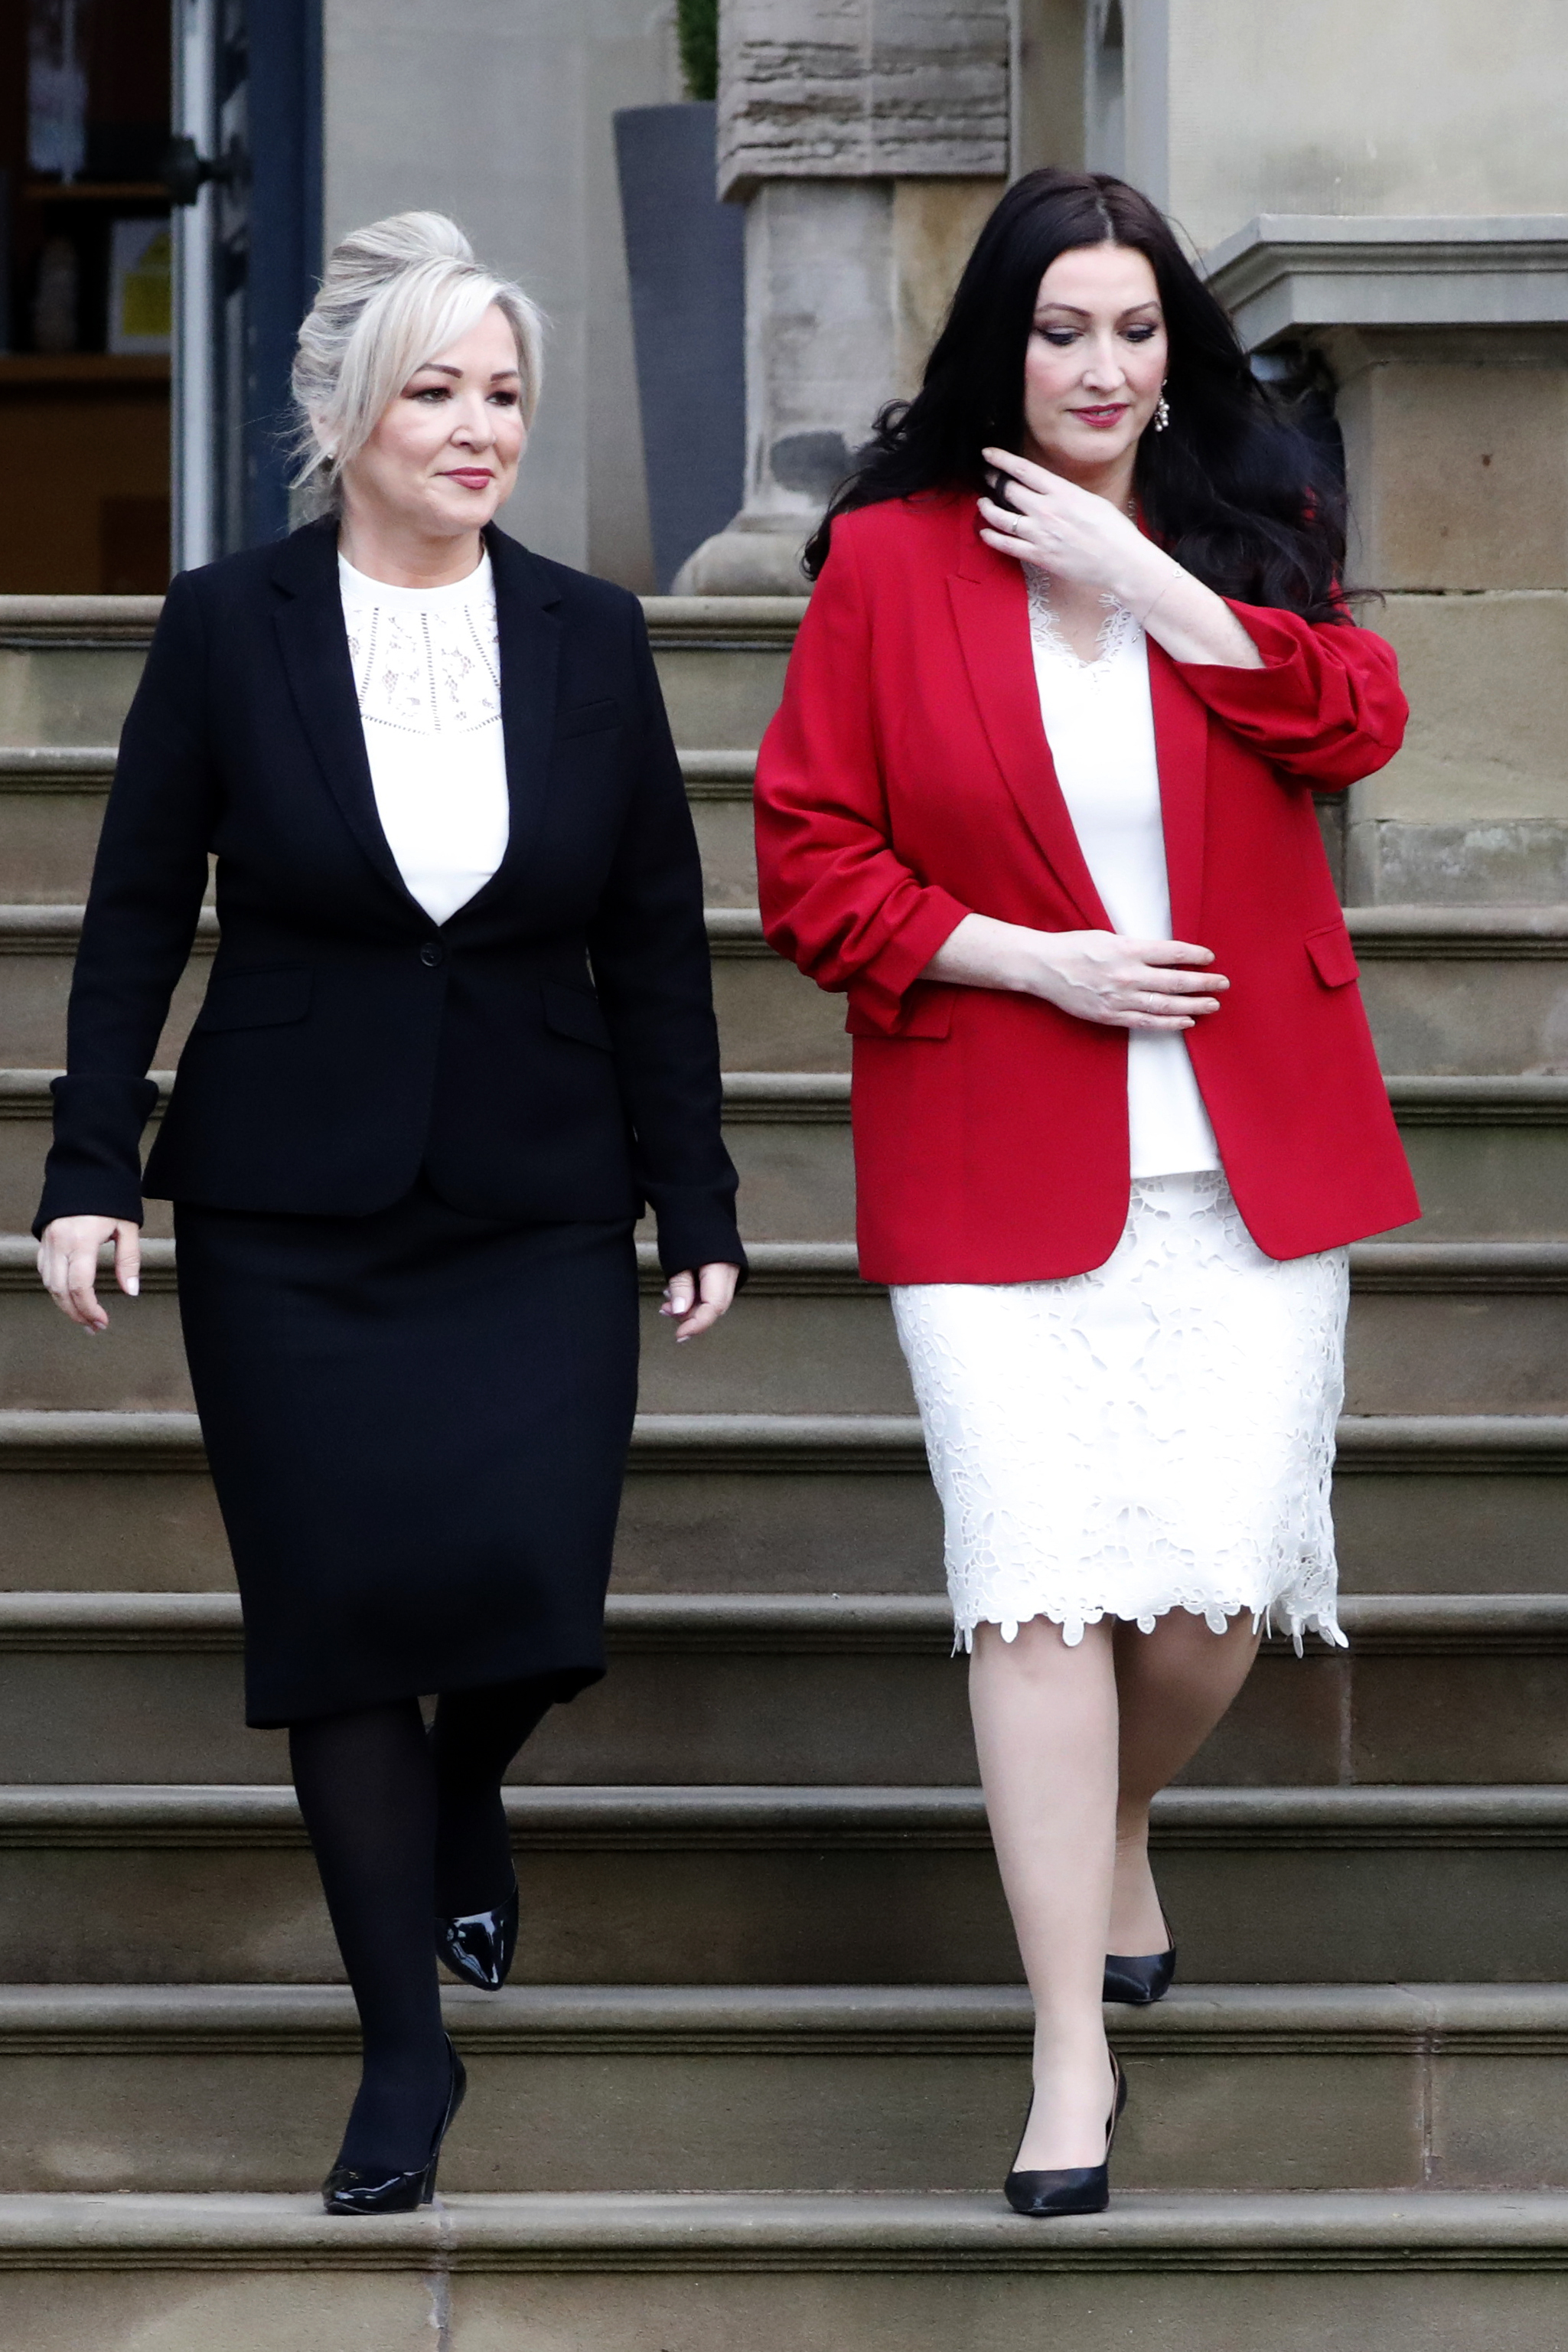 First Minister Michelle O'Neill, who made history by becoming the first nationalist to hold the role, and Deputy First Minister Emma Little-Pengelly